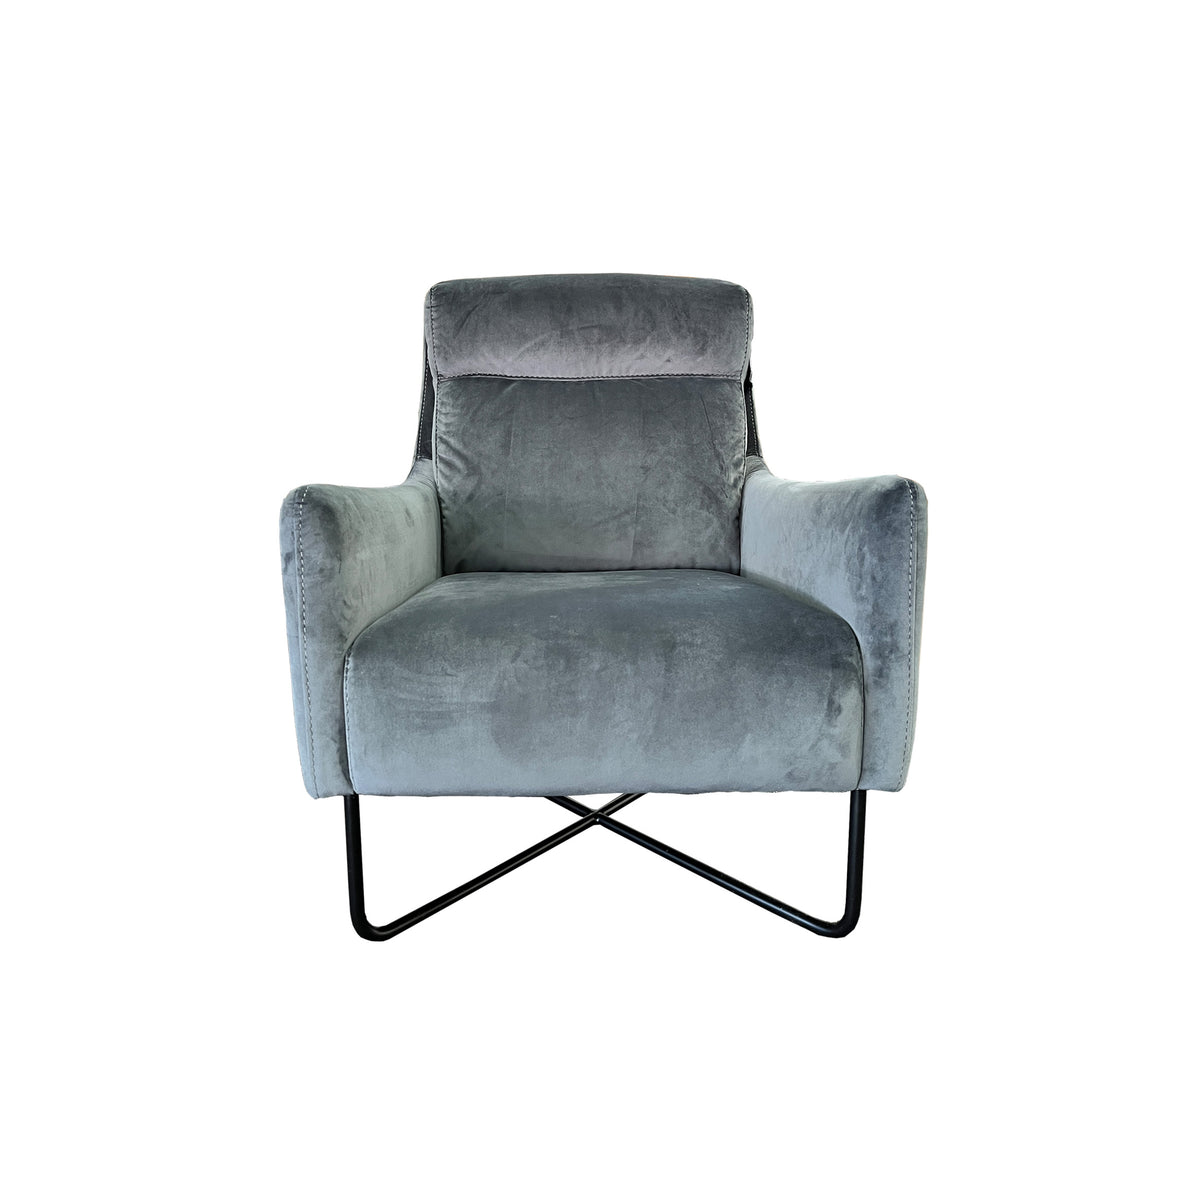 Trento Occasional Chair in Steel Grey Velvet fabric with chrome black legs